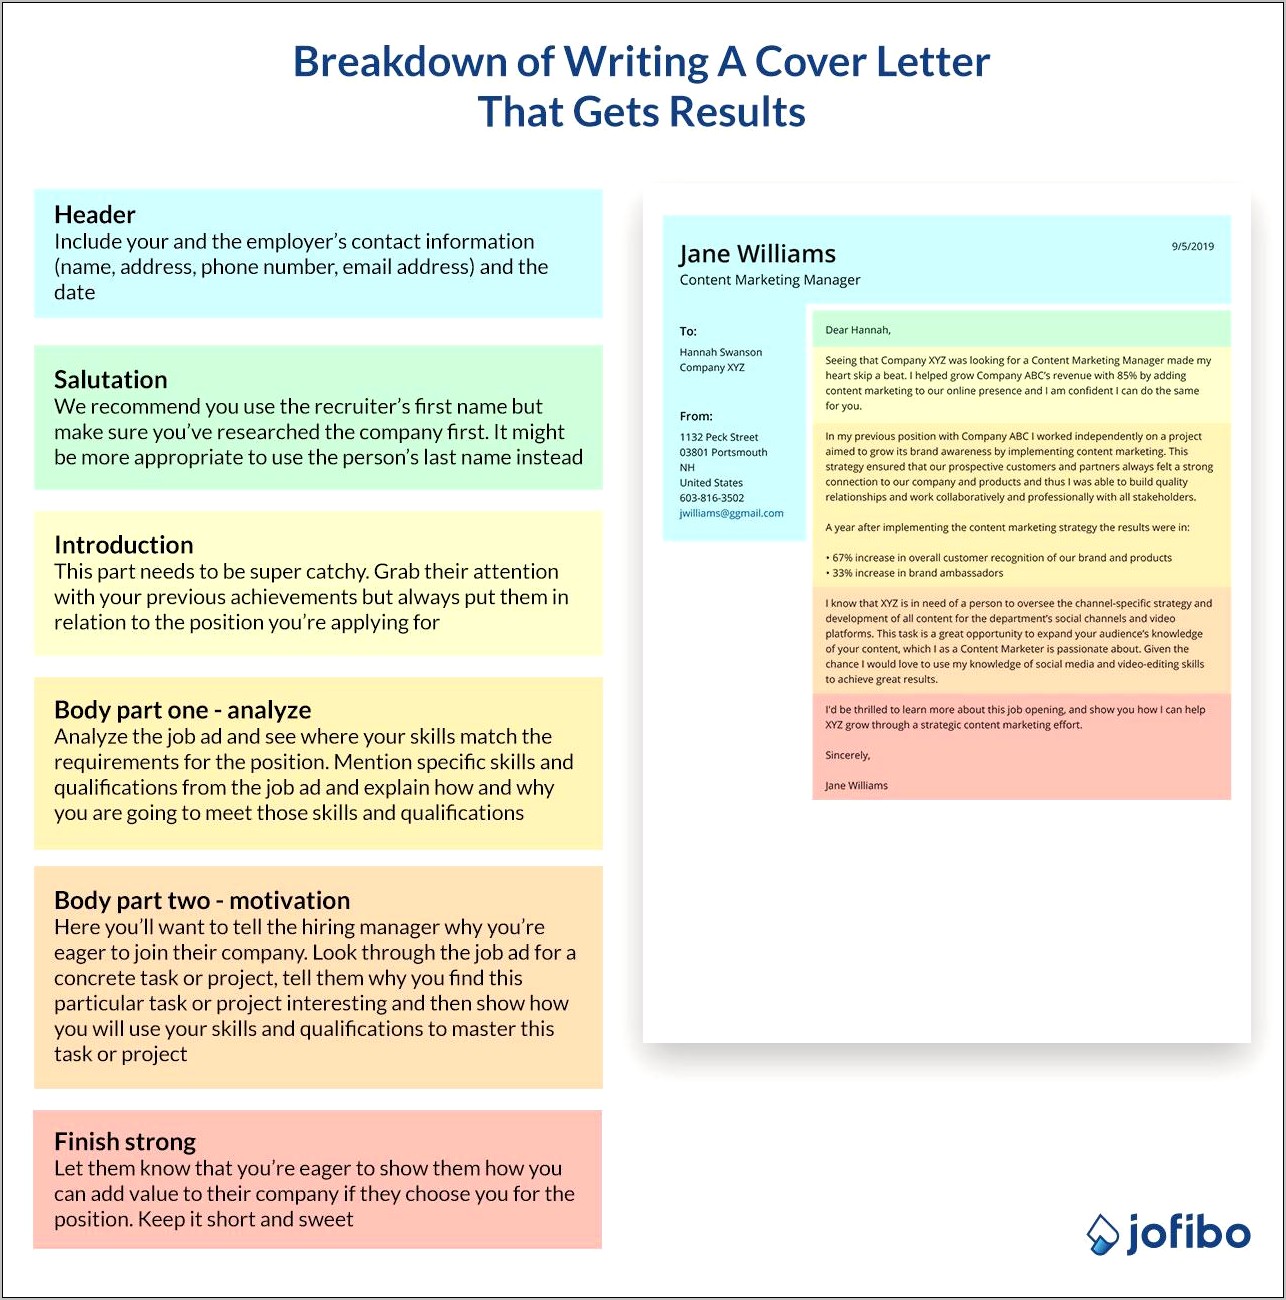 Steps To Writing A Resume And Cover Letter